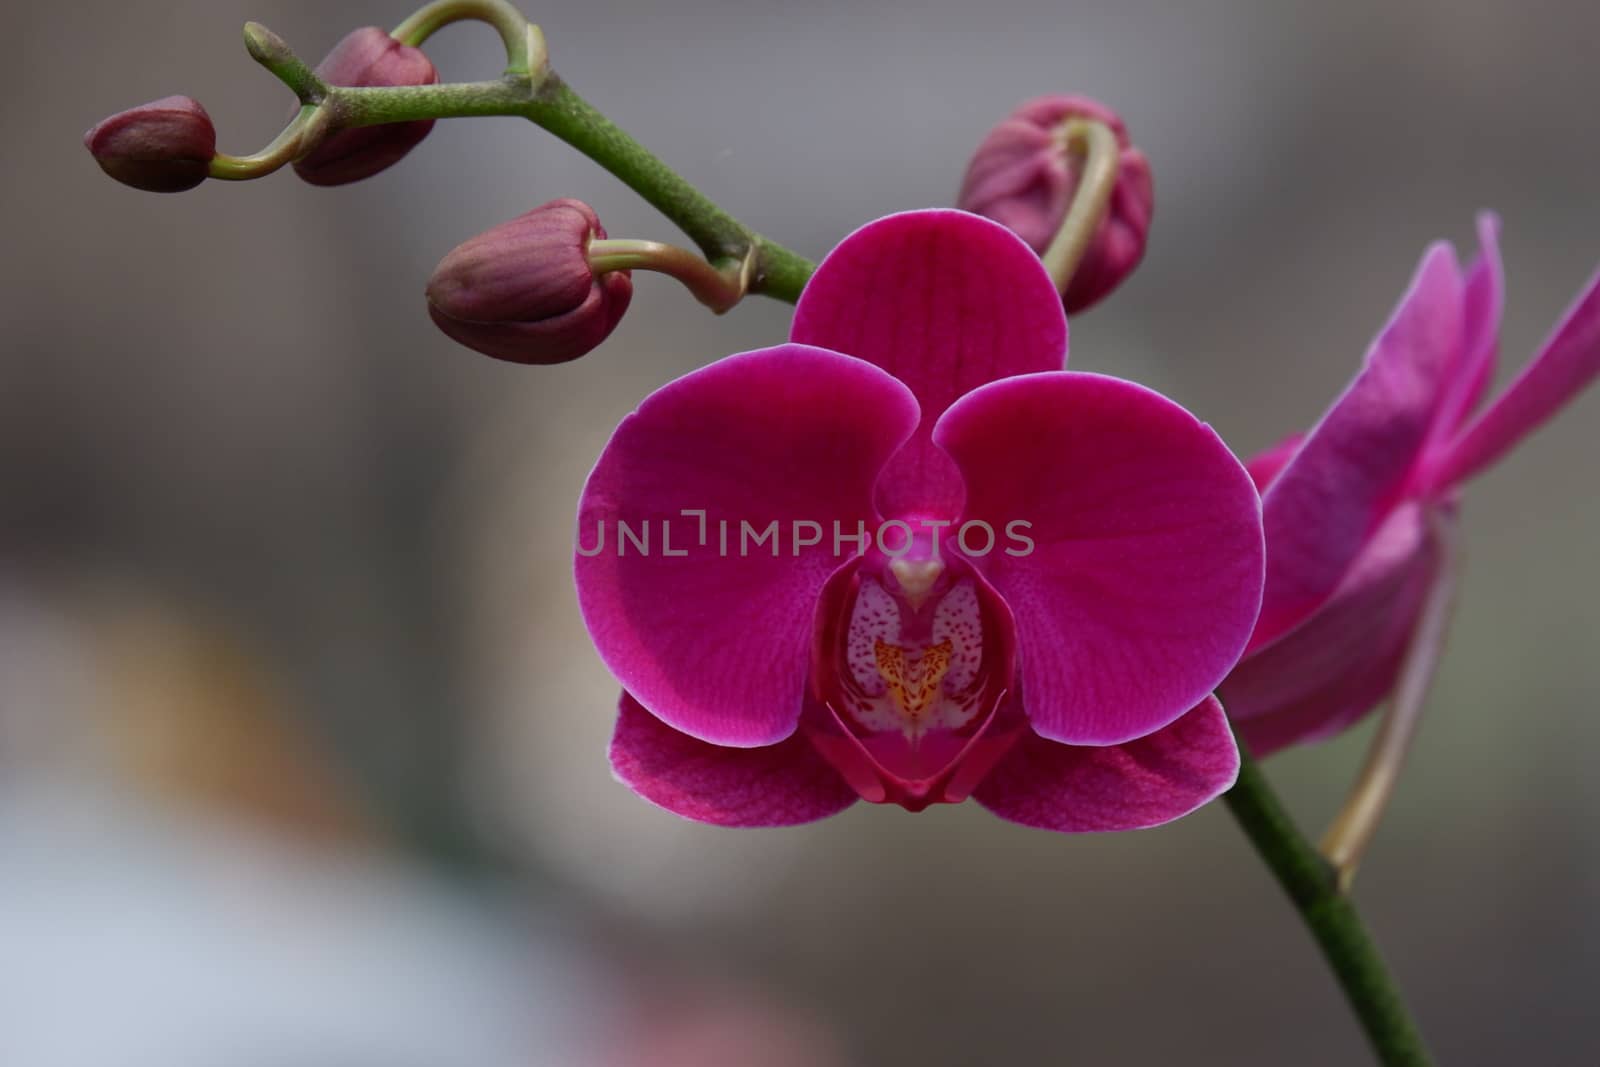 Bunga Anggrek Bulan Ungu , Close up view of beautiful purple phalaenopsis amabilis / moth orchids in full bloom in the garden with yellow pistils isolated on blur background